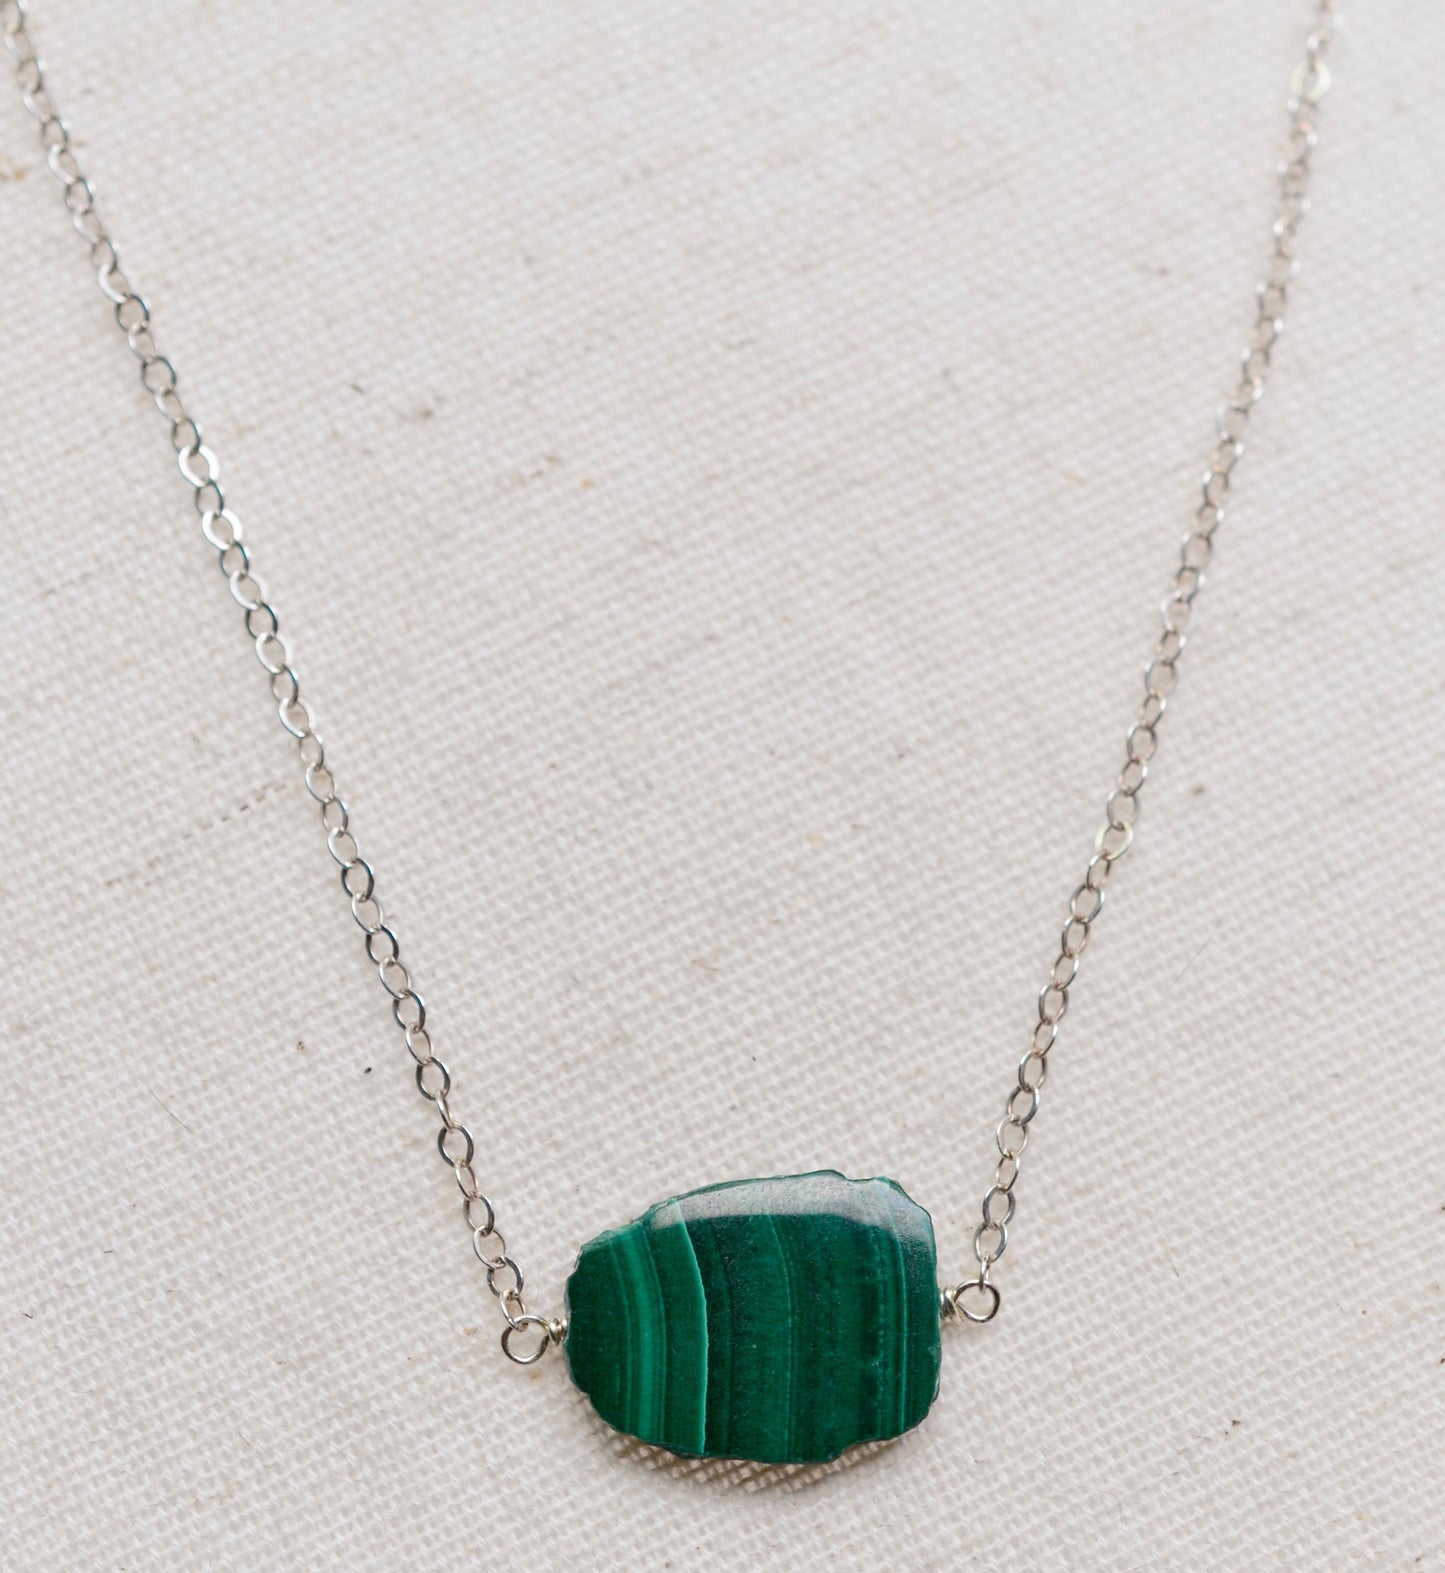 Malachite Necklace, Natural Malachite Sterling Silver or Gold Filled